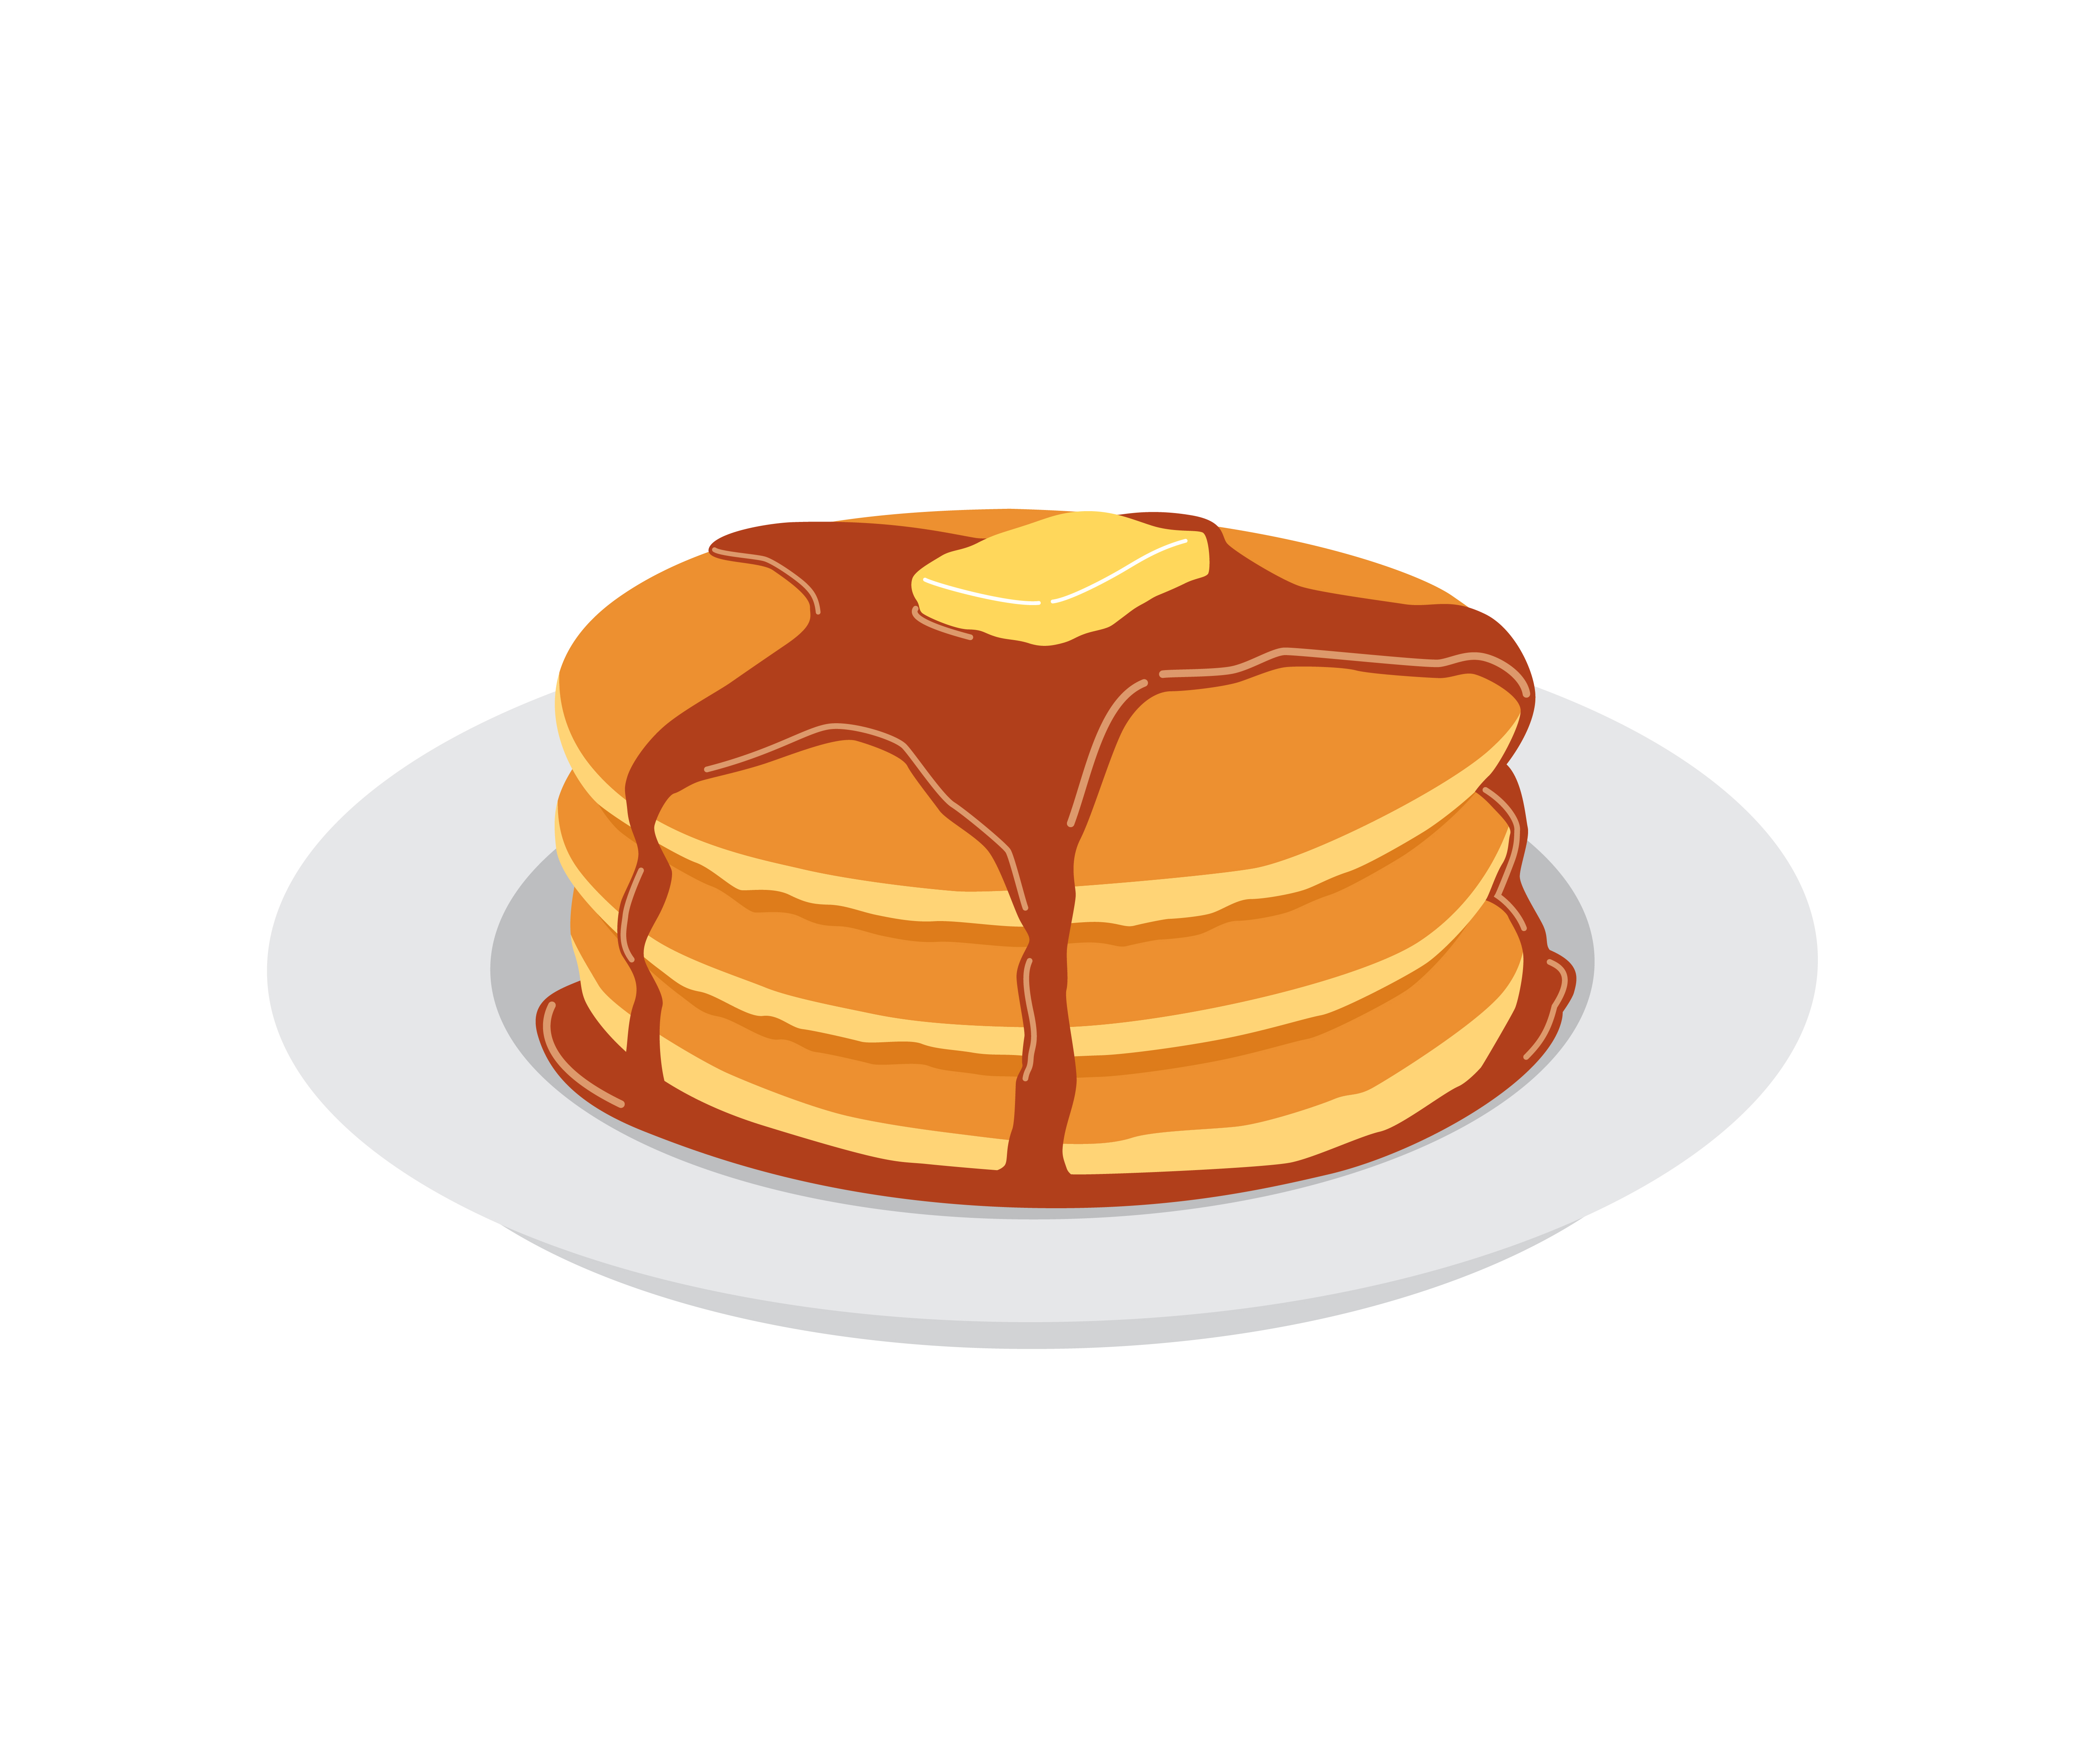 Pancake clipart plate pancake. Pancakes with butter and